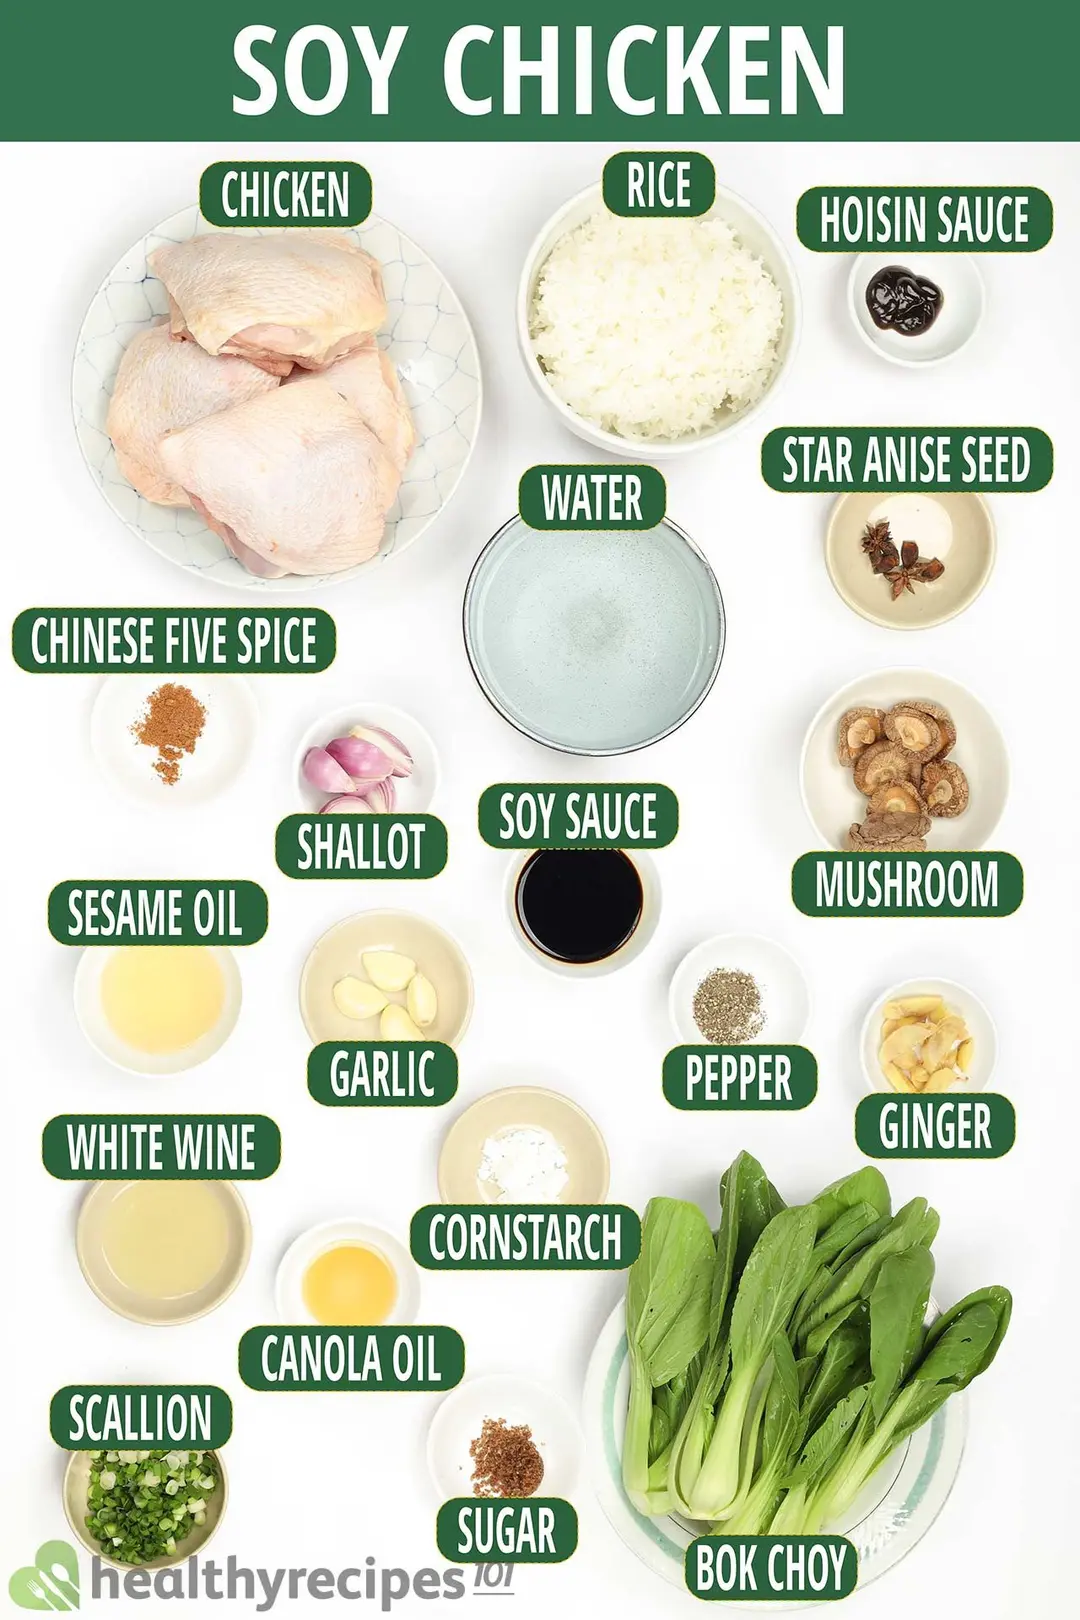 Ingredients for soy sauce chicken, including raw chicken thighs, white rice, bok choy, soy sauce, and various condiments